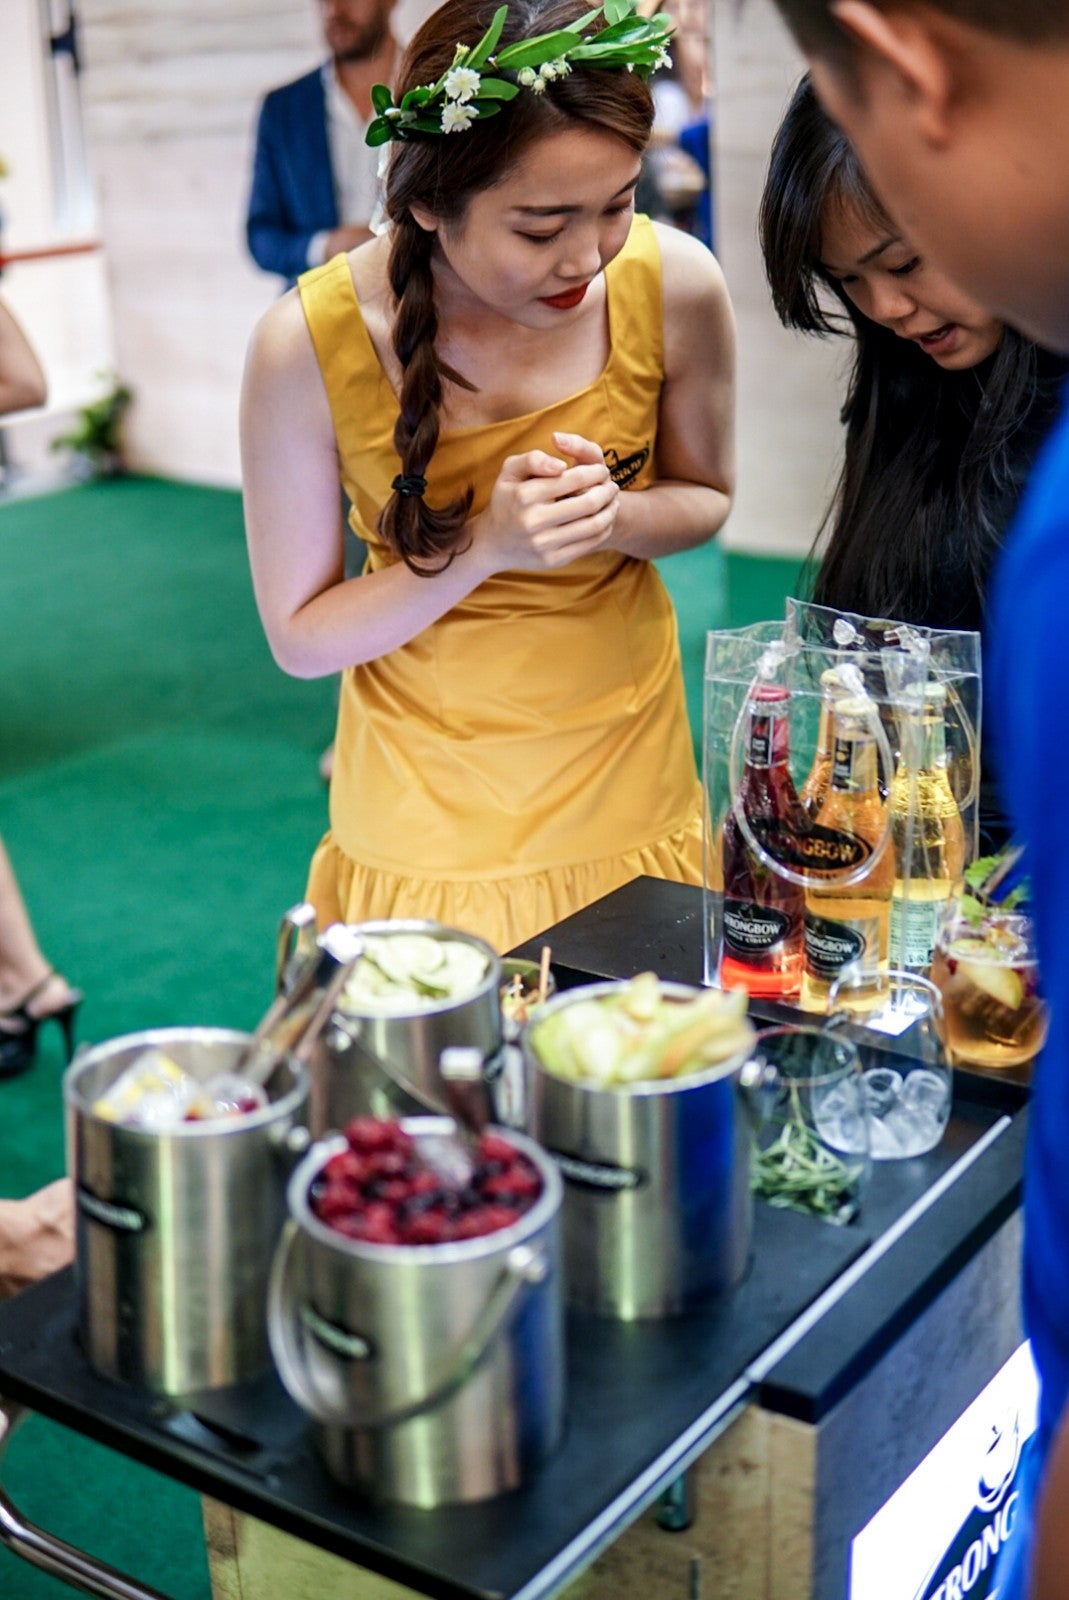 [TEST] See What Happens When Nature Takes Over a Mall at This PJ Event That Offers FREE Cider Sampling! - WORLD OF BUZZ 2